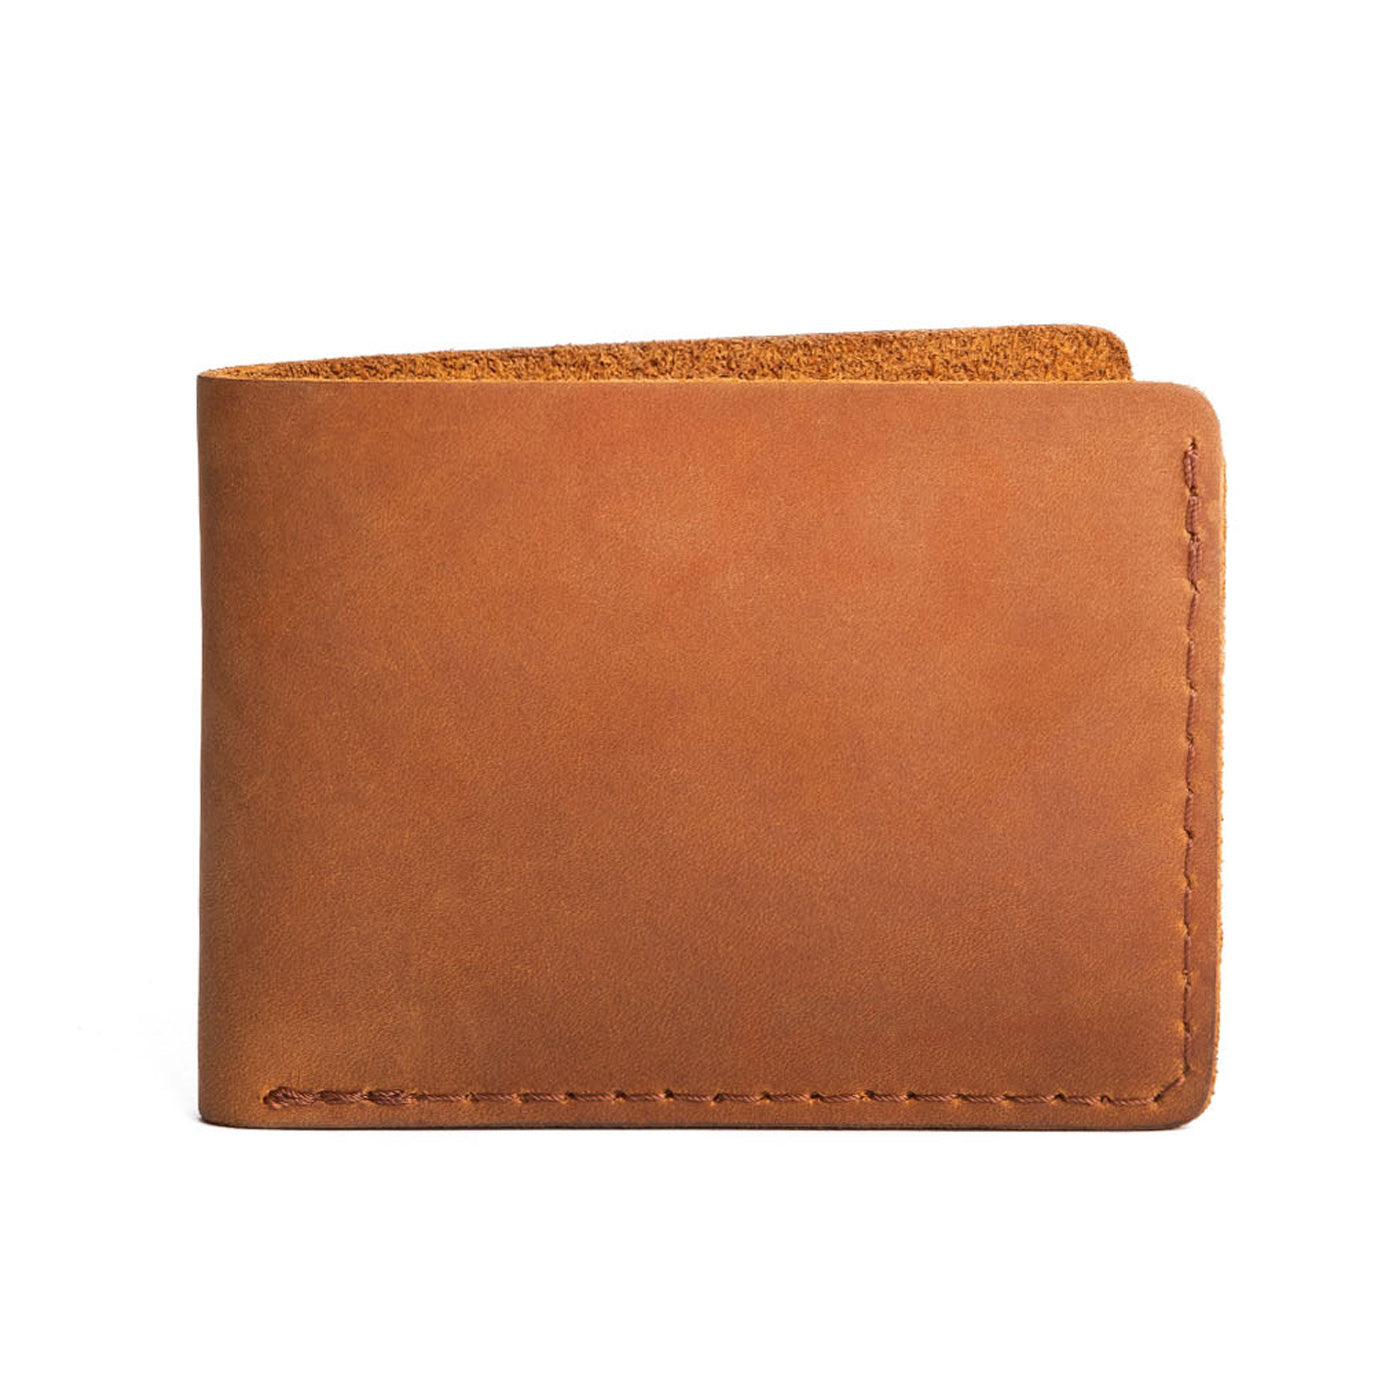 Almost Perfect Bifold Leather Wallet